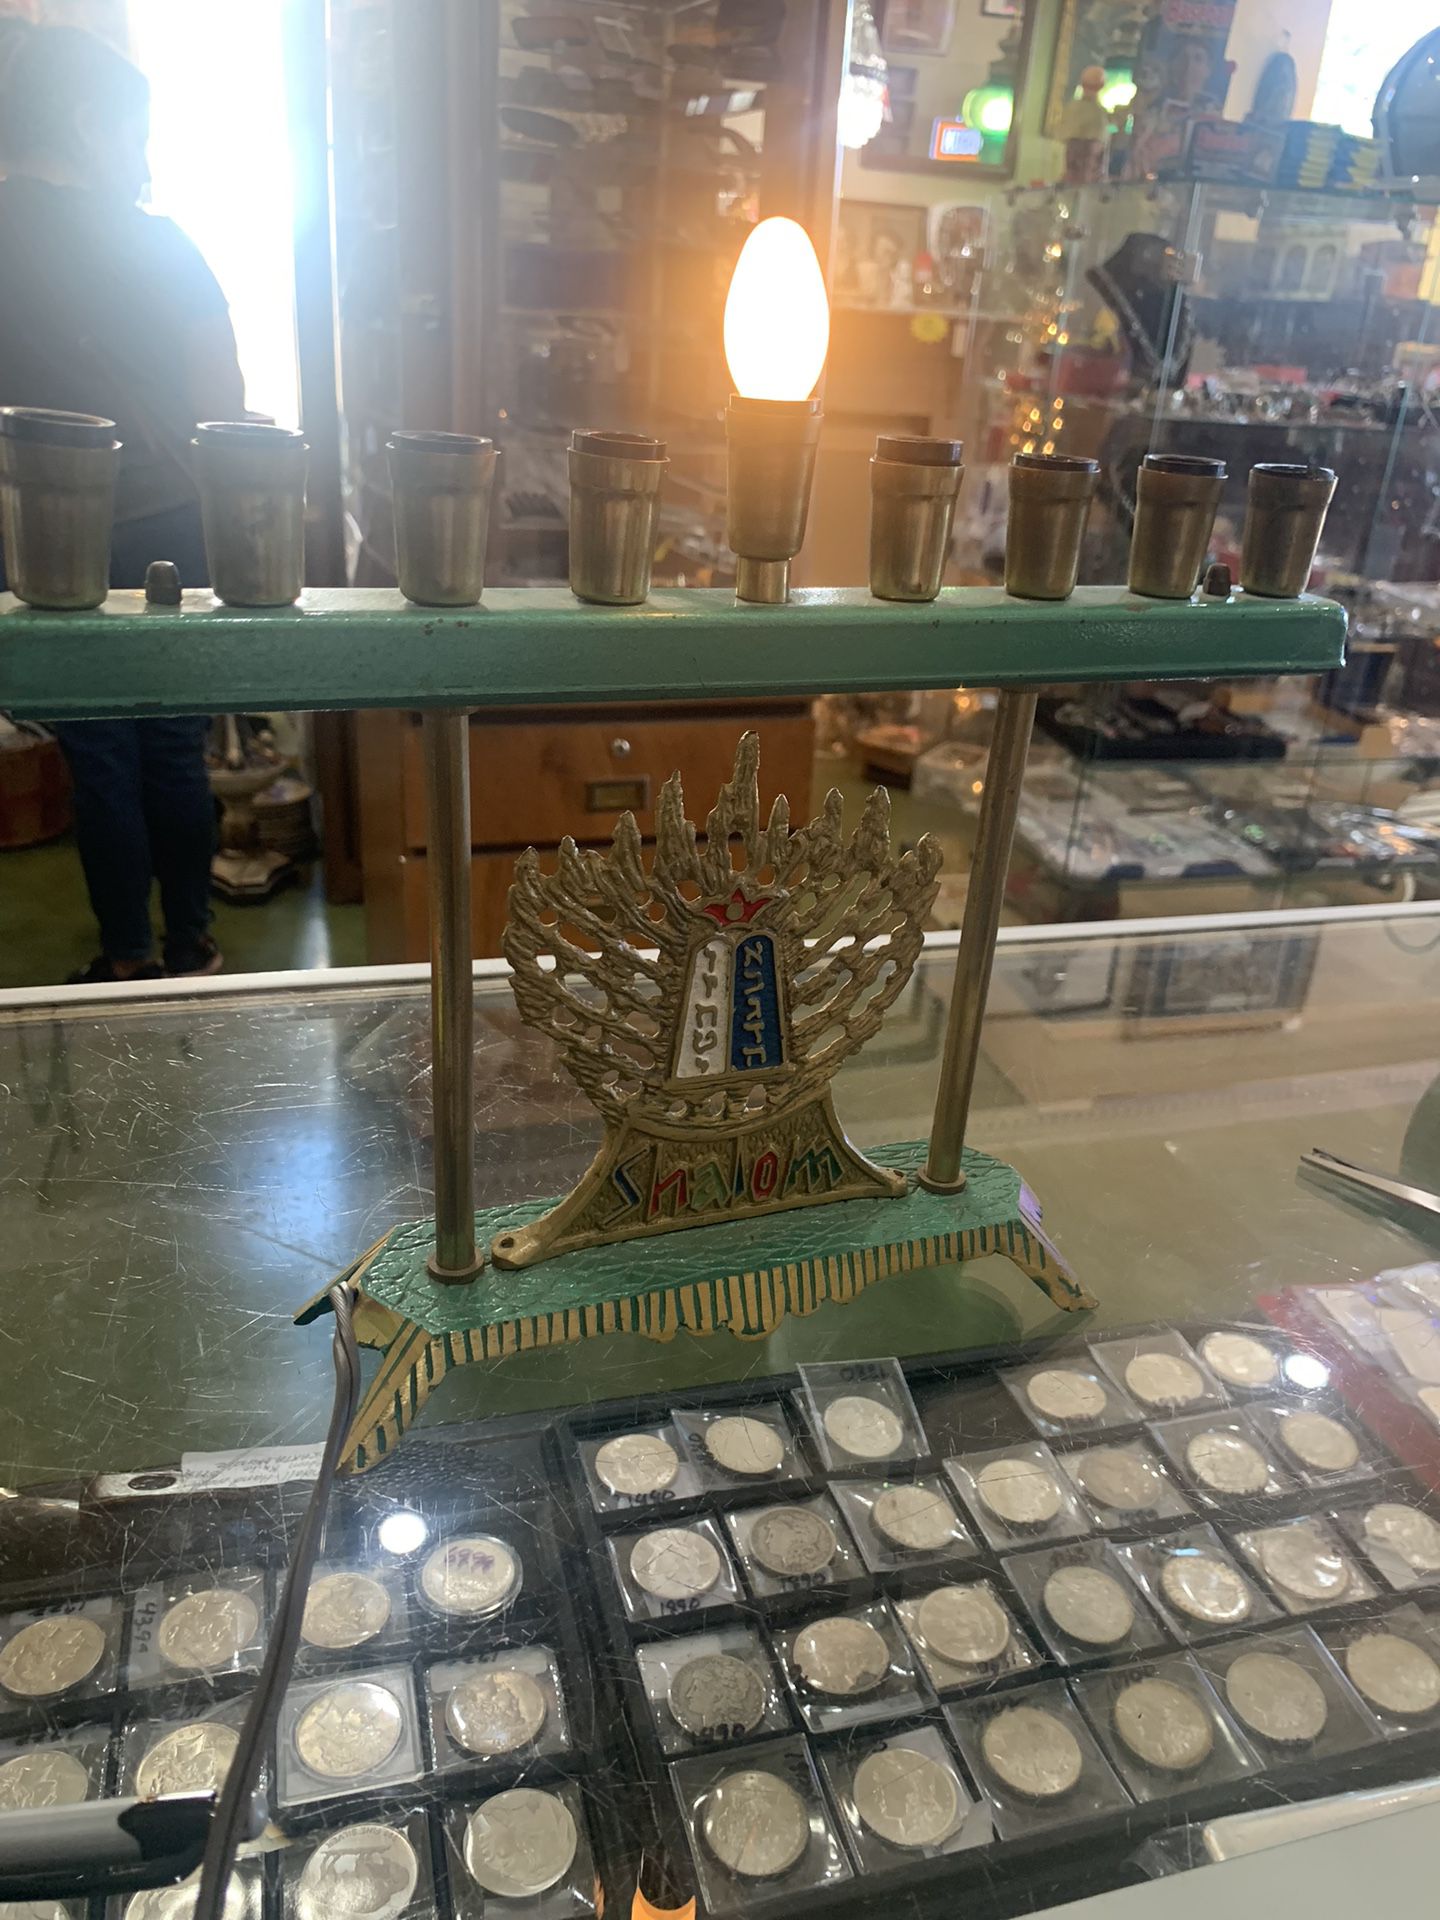 13x10 vintage MENORAH lights up  35.00.  Johanna at Antiques and More. Located at 316b Main Street Buda. Antiques vintage retro furniture collectibles